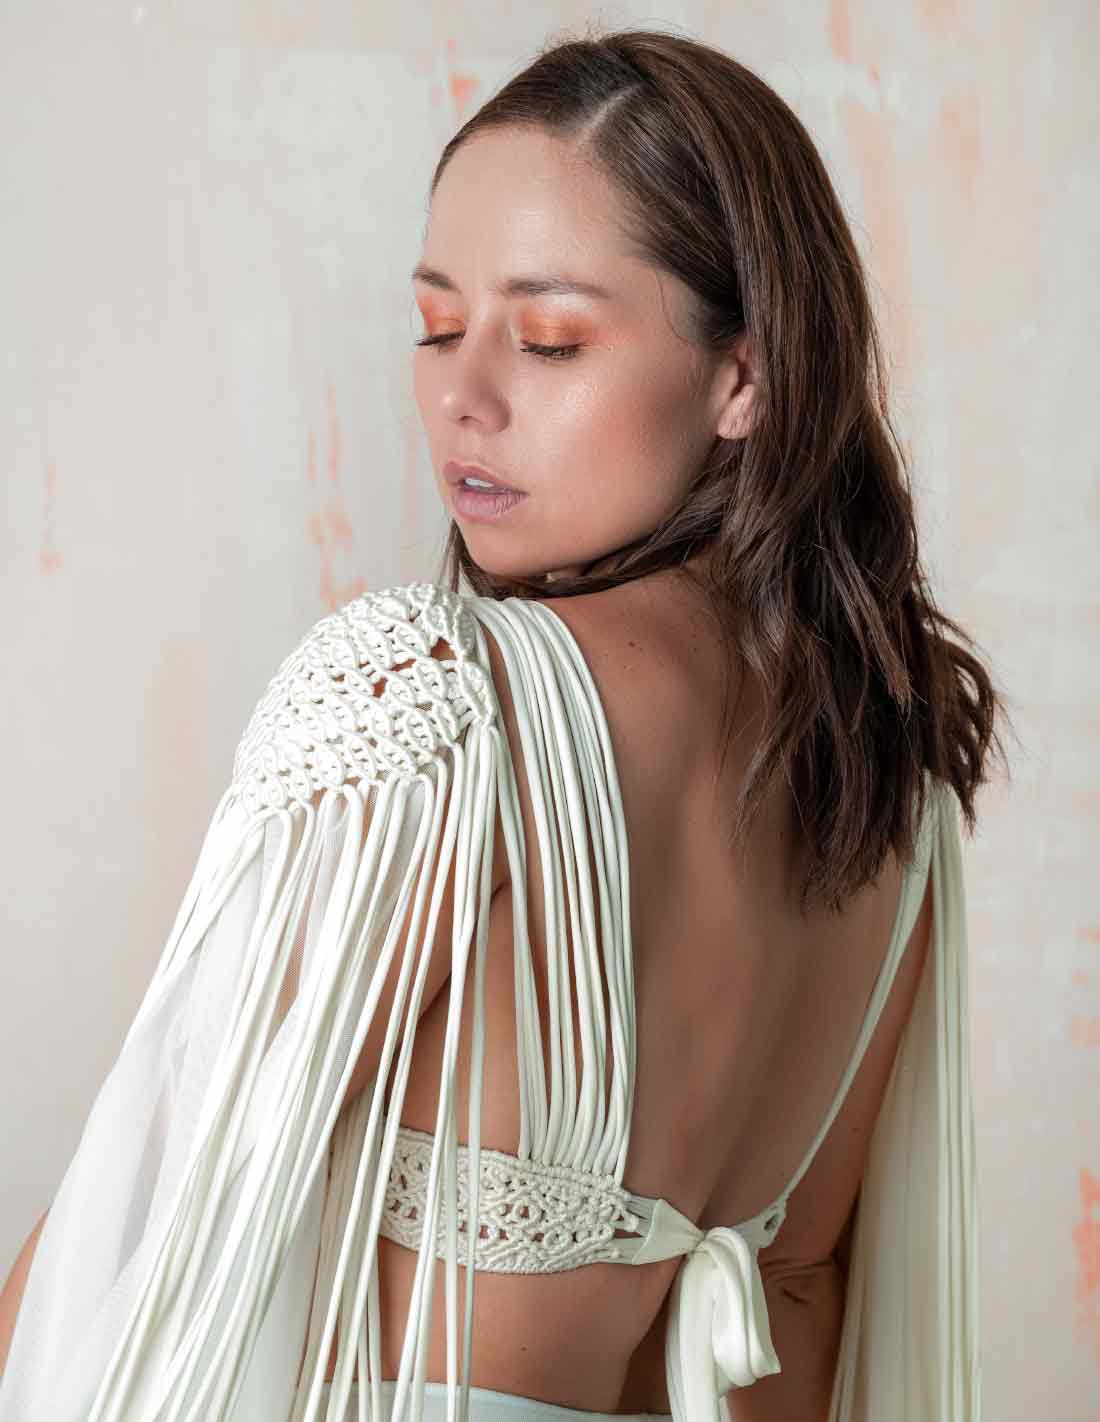 Pluie Shoulder Pads Ivory. Shoulder Pads With Hand Woven Macramé In Ivory. Entreaguas